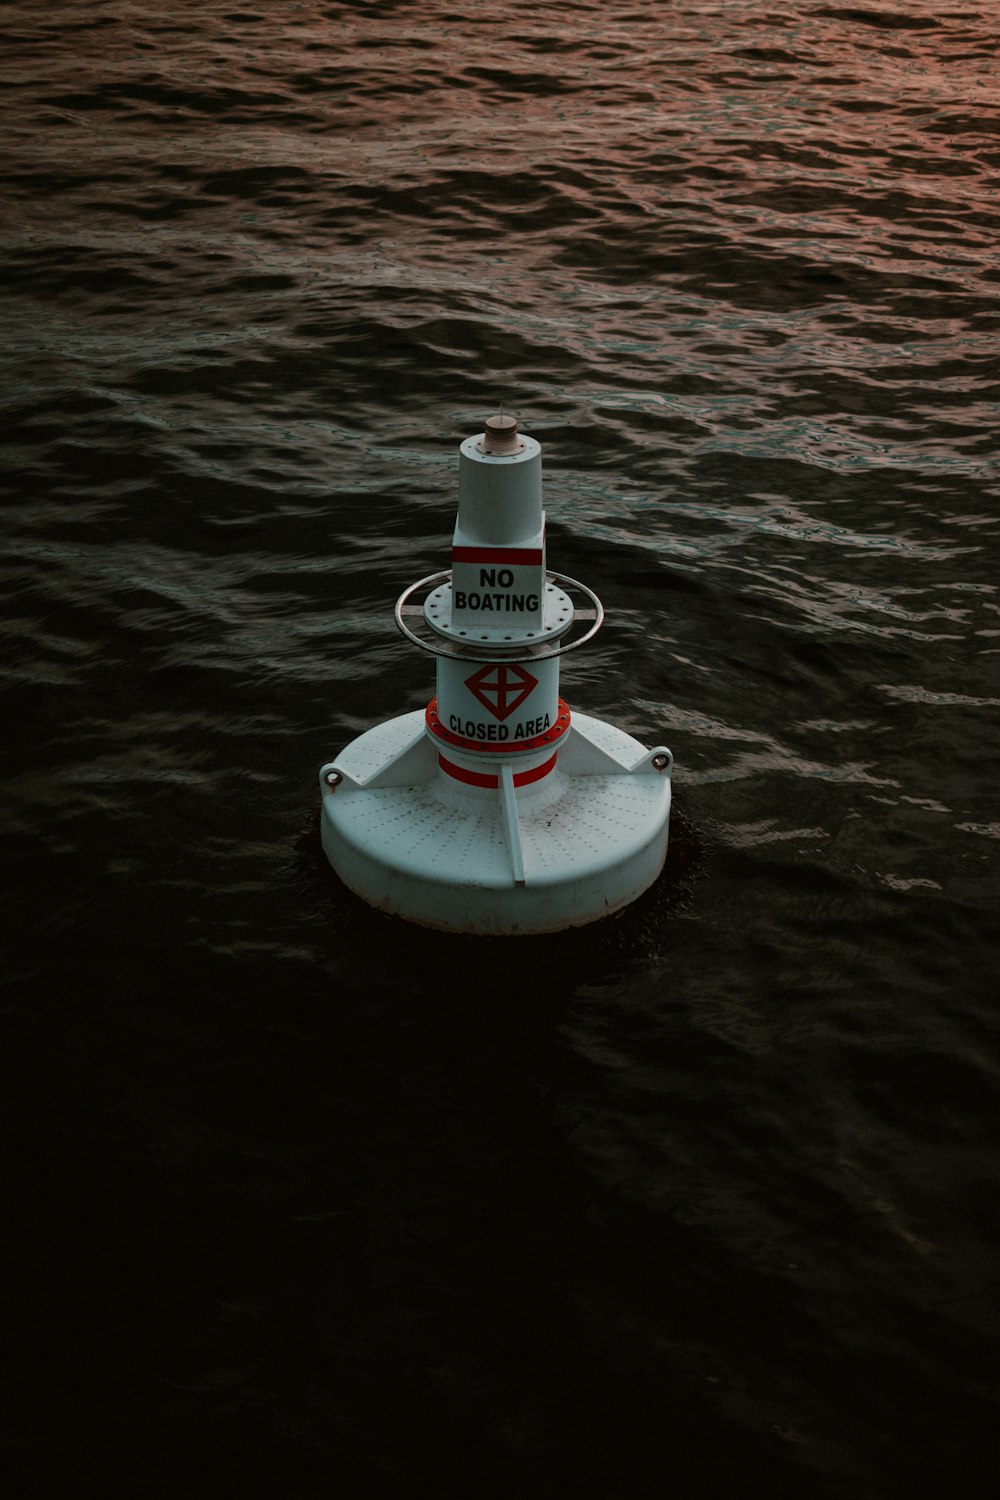 a small white and red boat